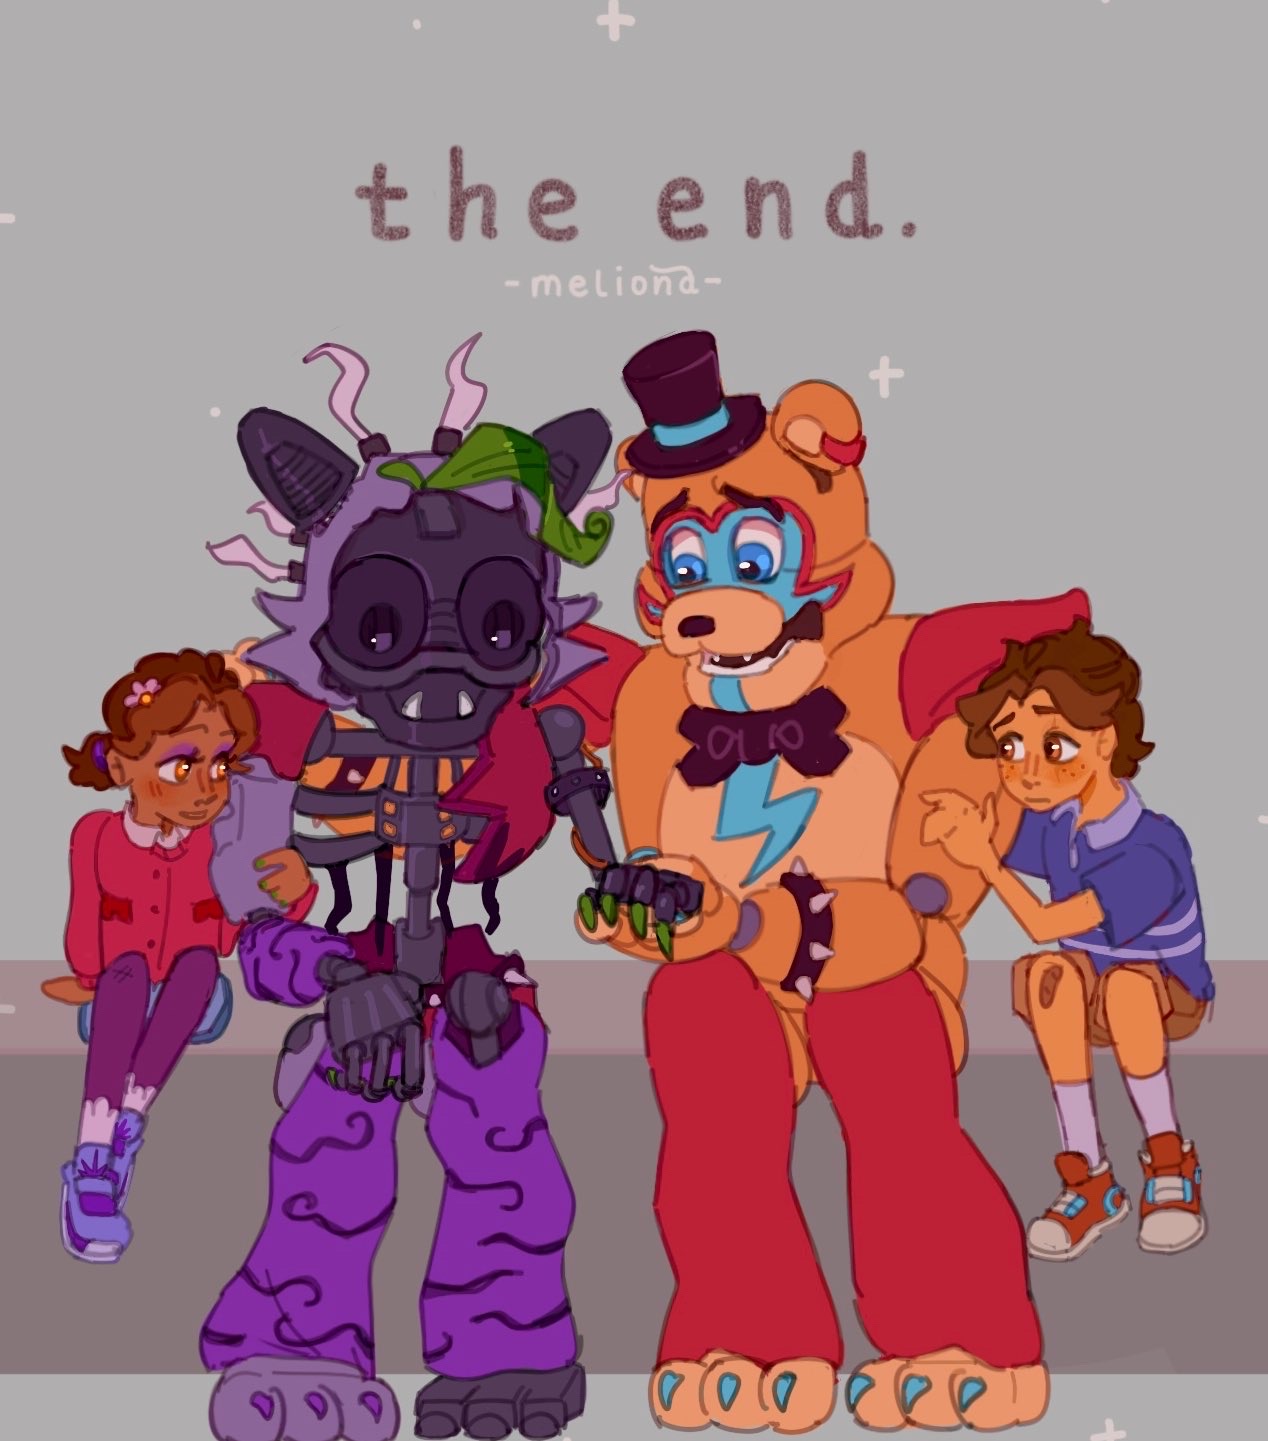 Every Ending In Five Nights At Freddy's: Security Breach Ruin